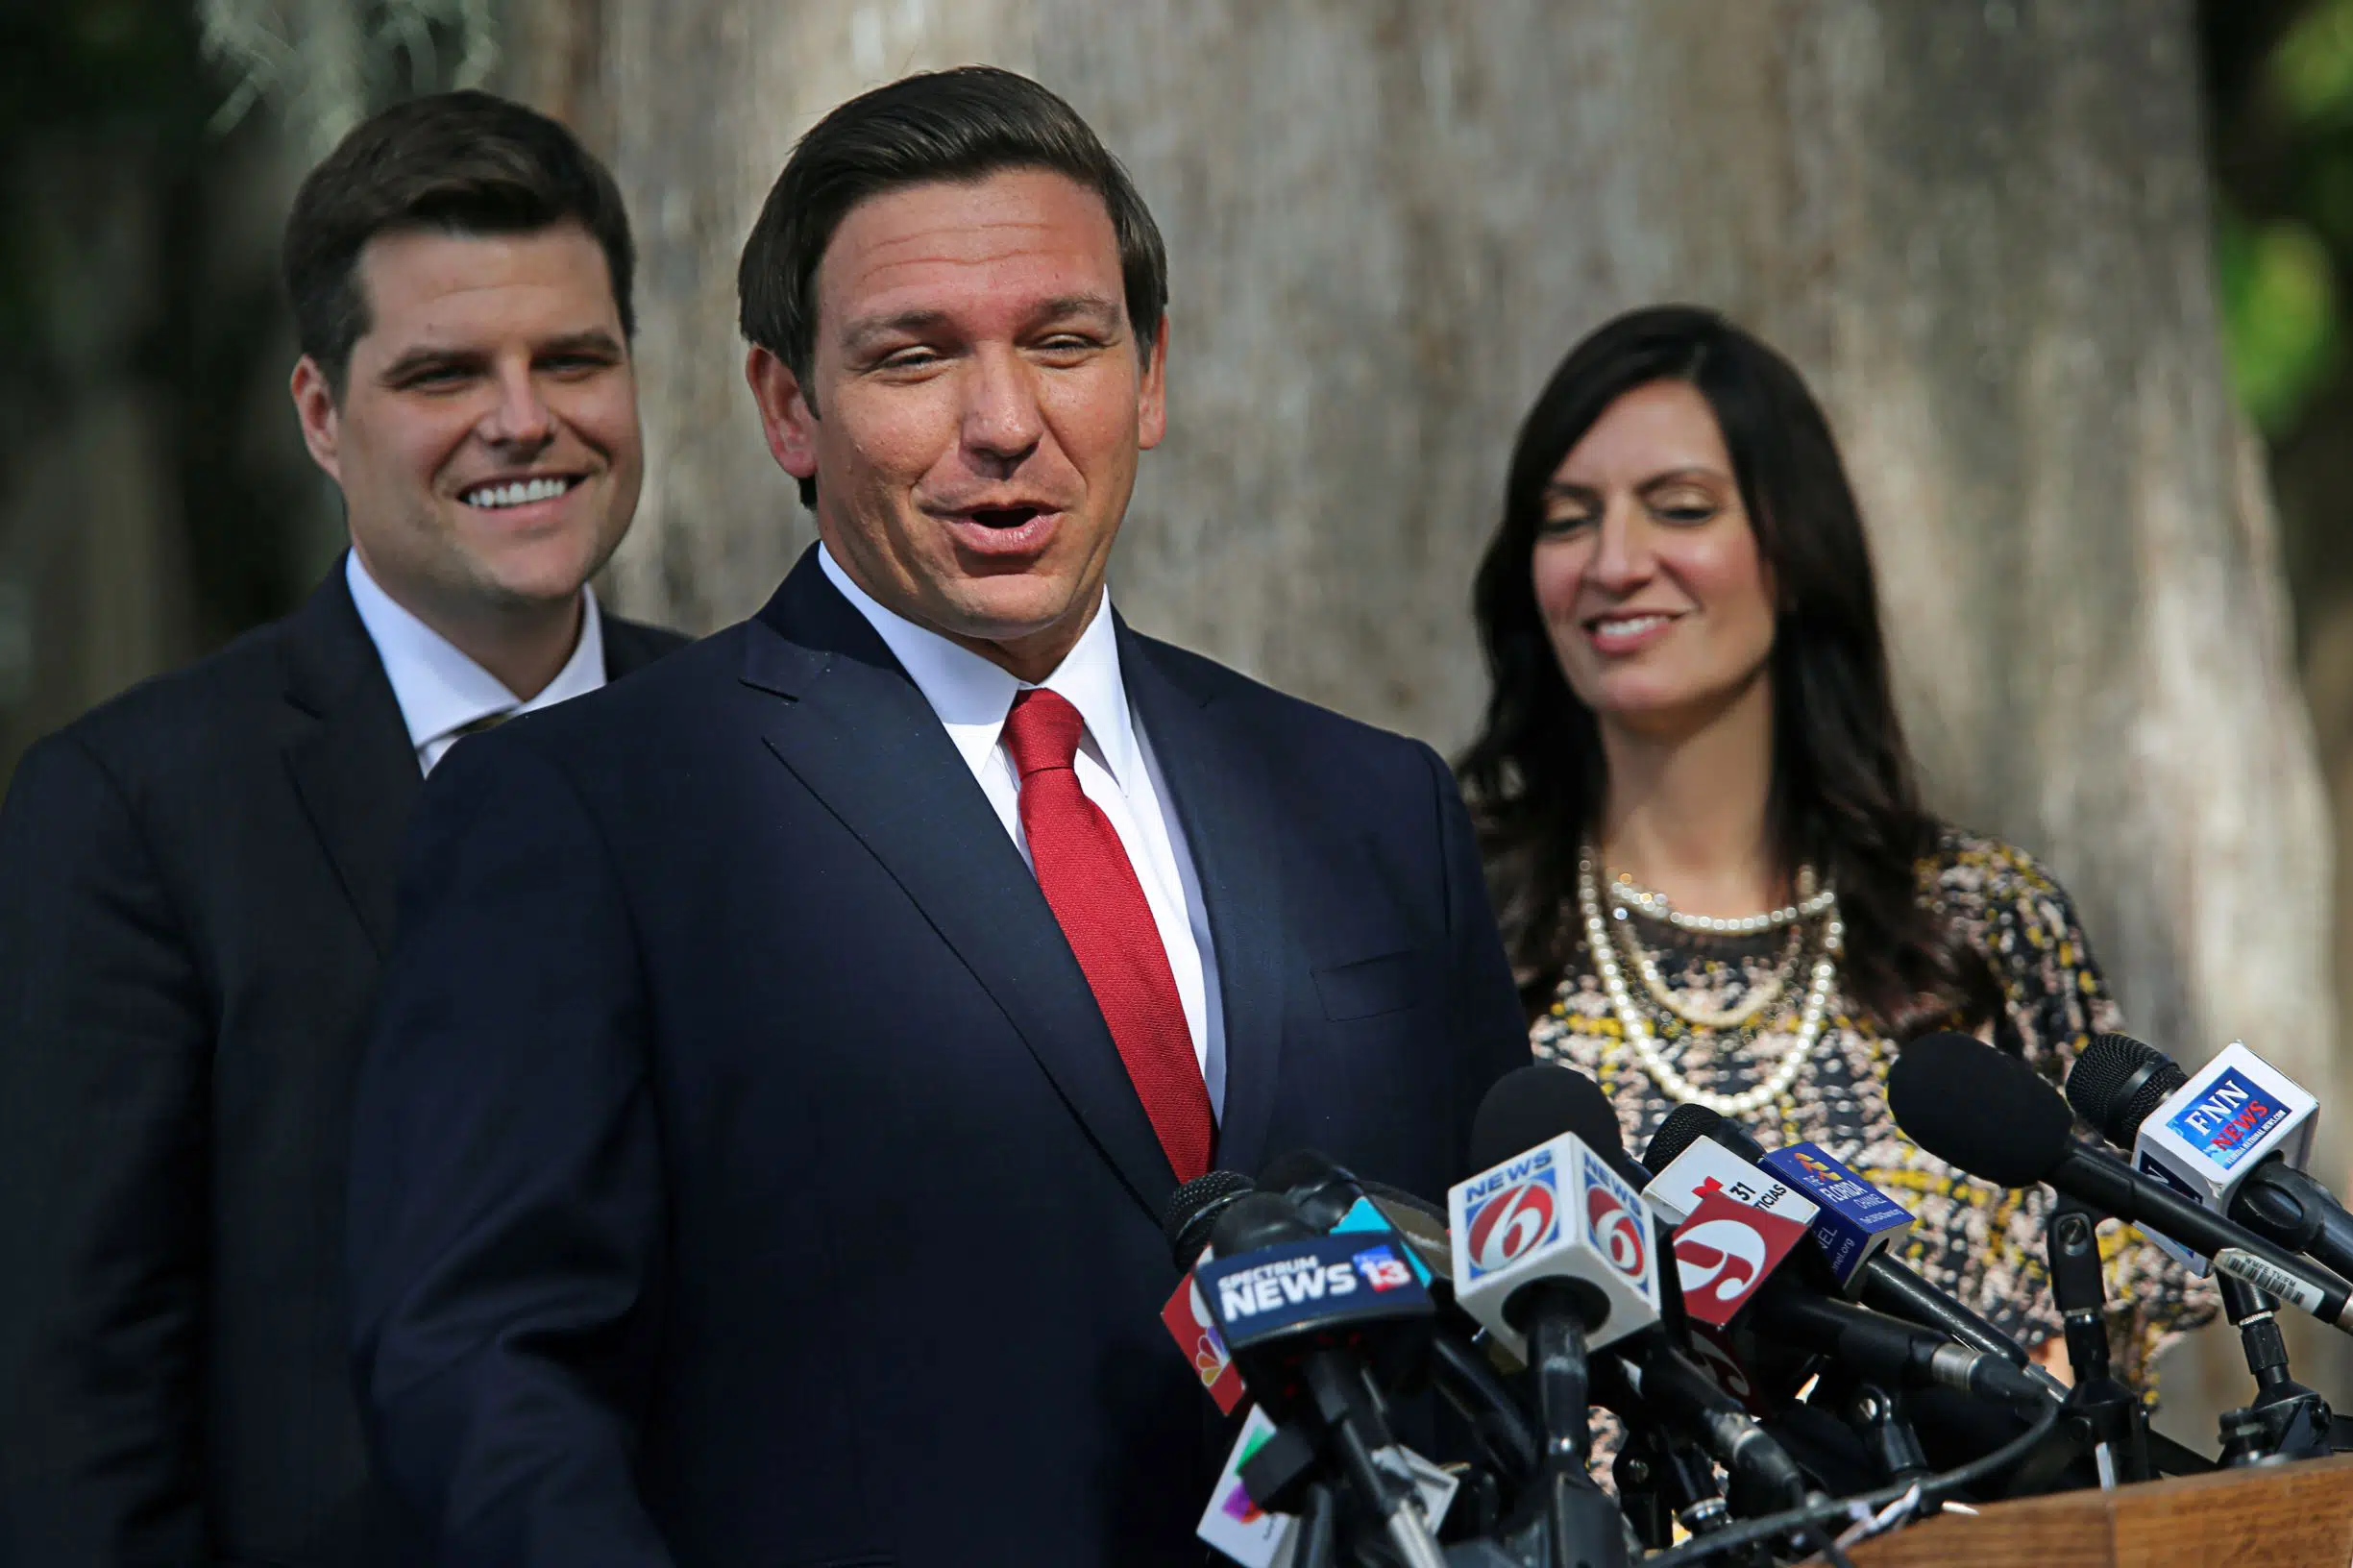 Florida Republicans Pass Voting Limits in Broad Elections Bill